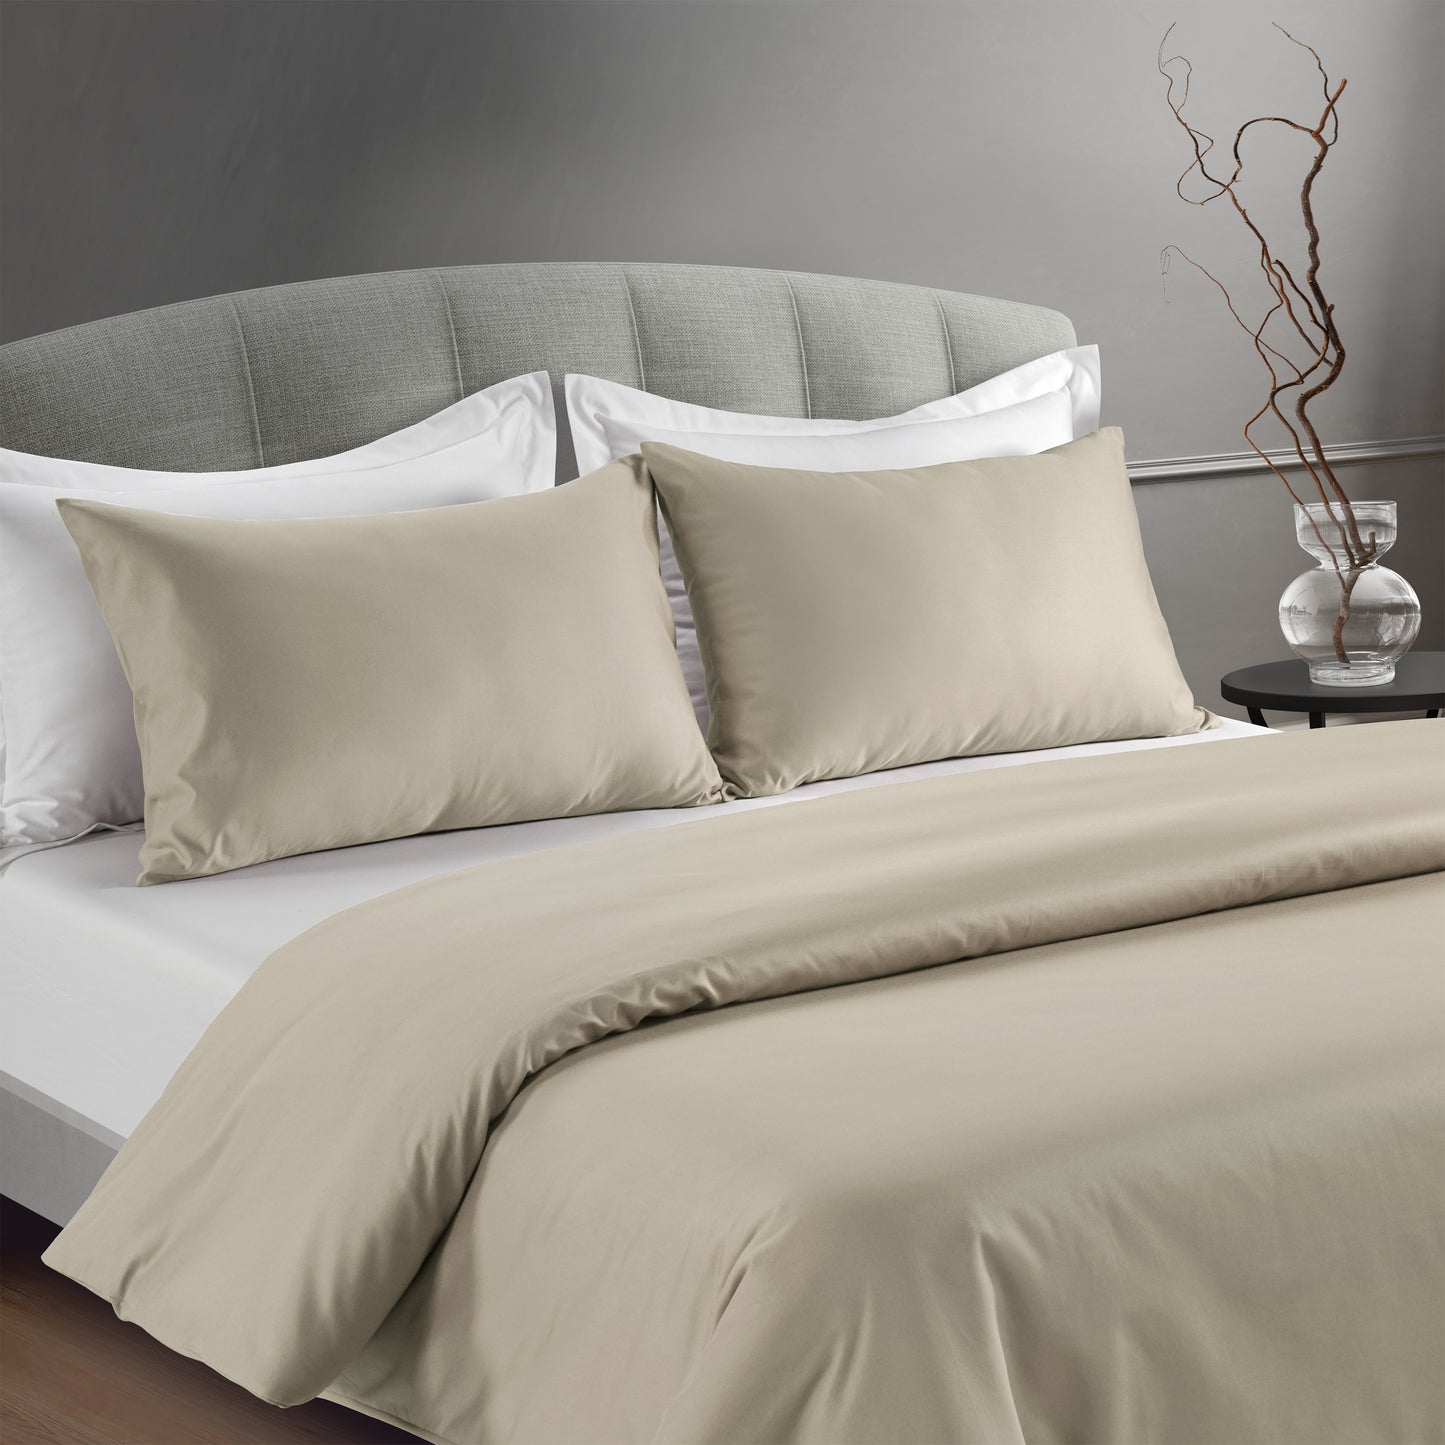 300 Thread Count Peaceful Empress - Oatmeal with White Bedding Set